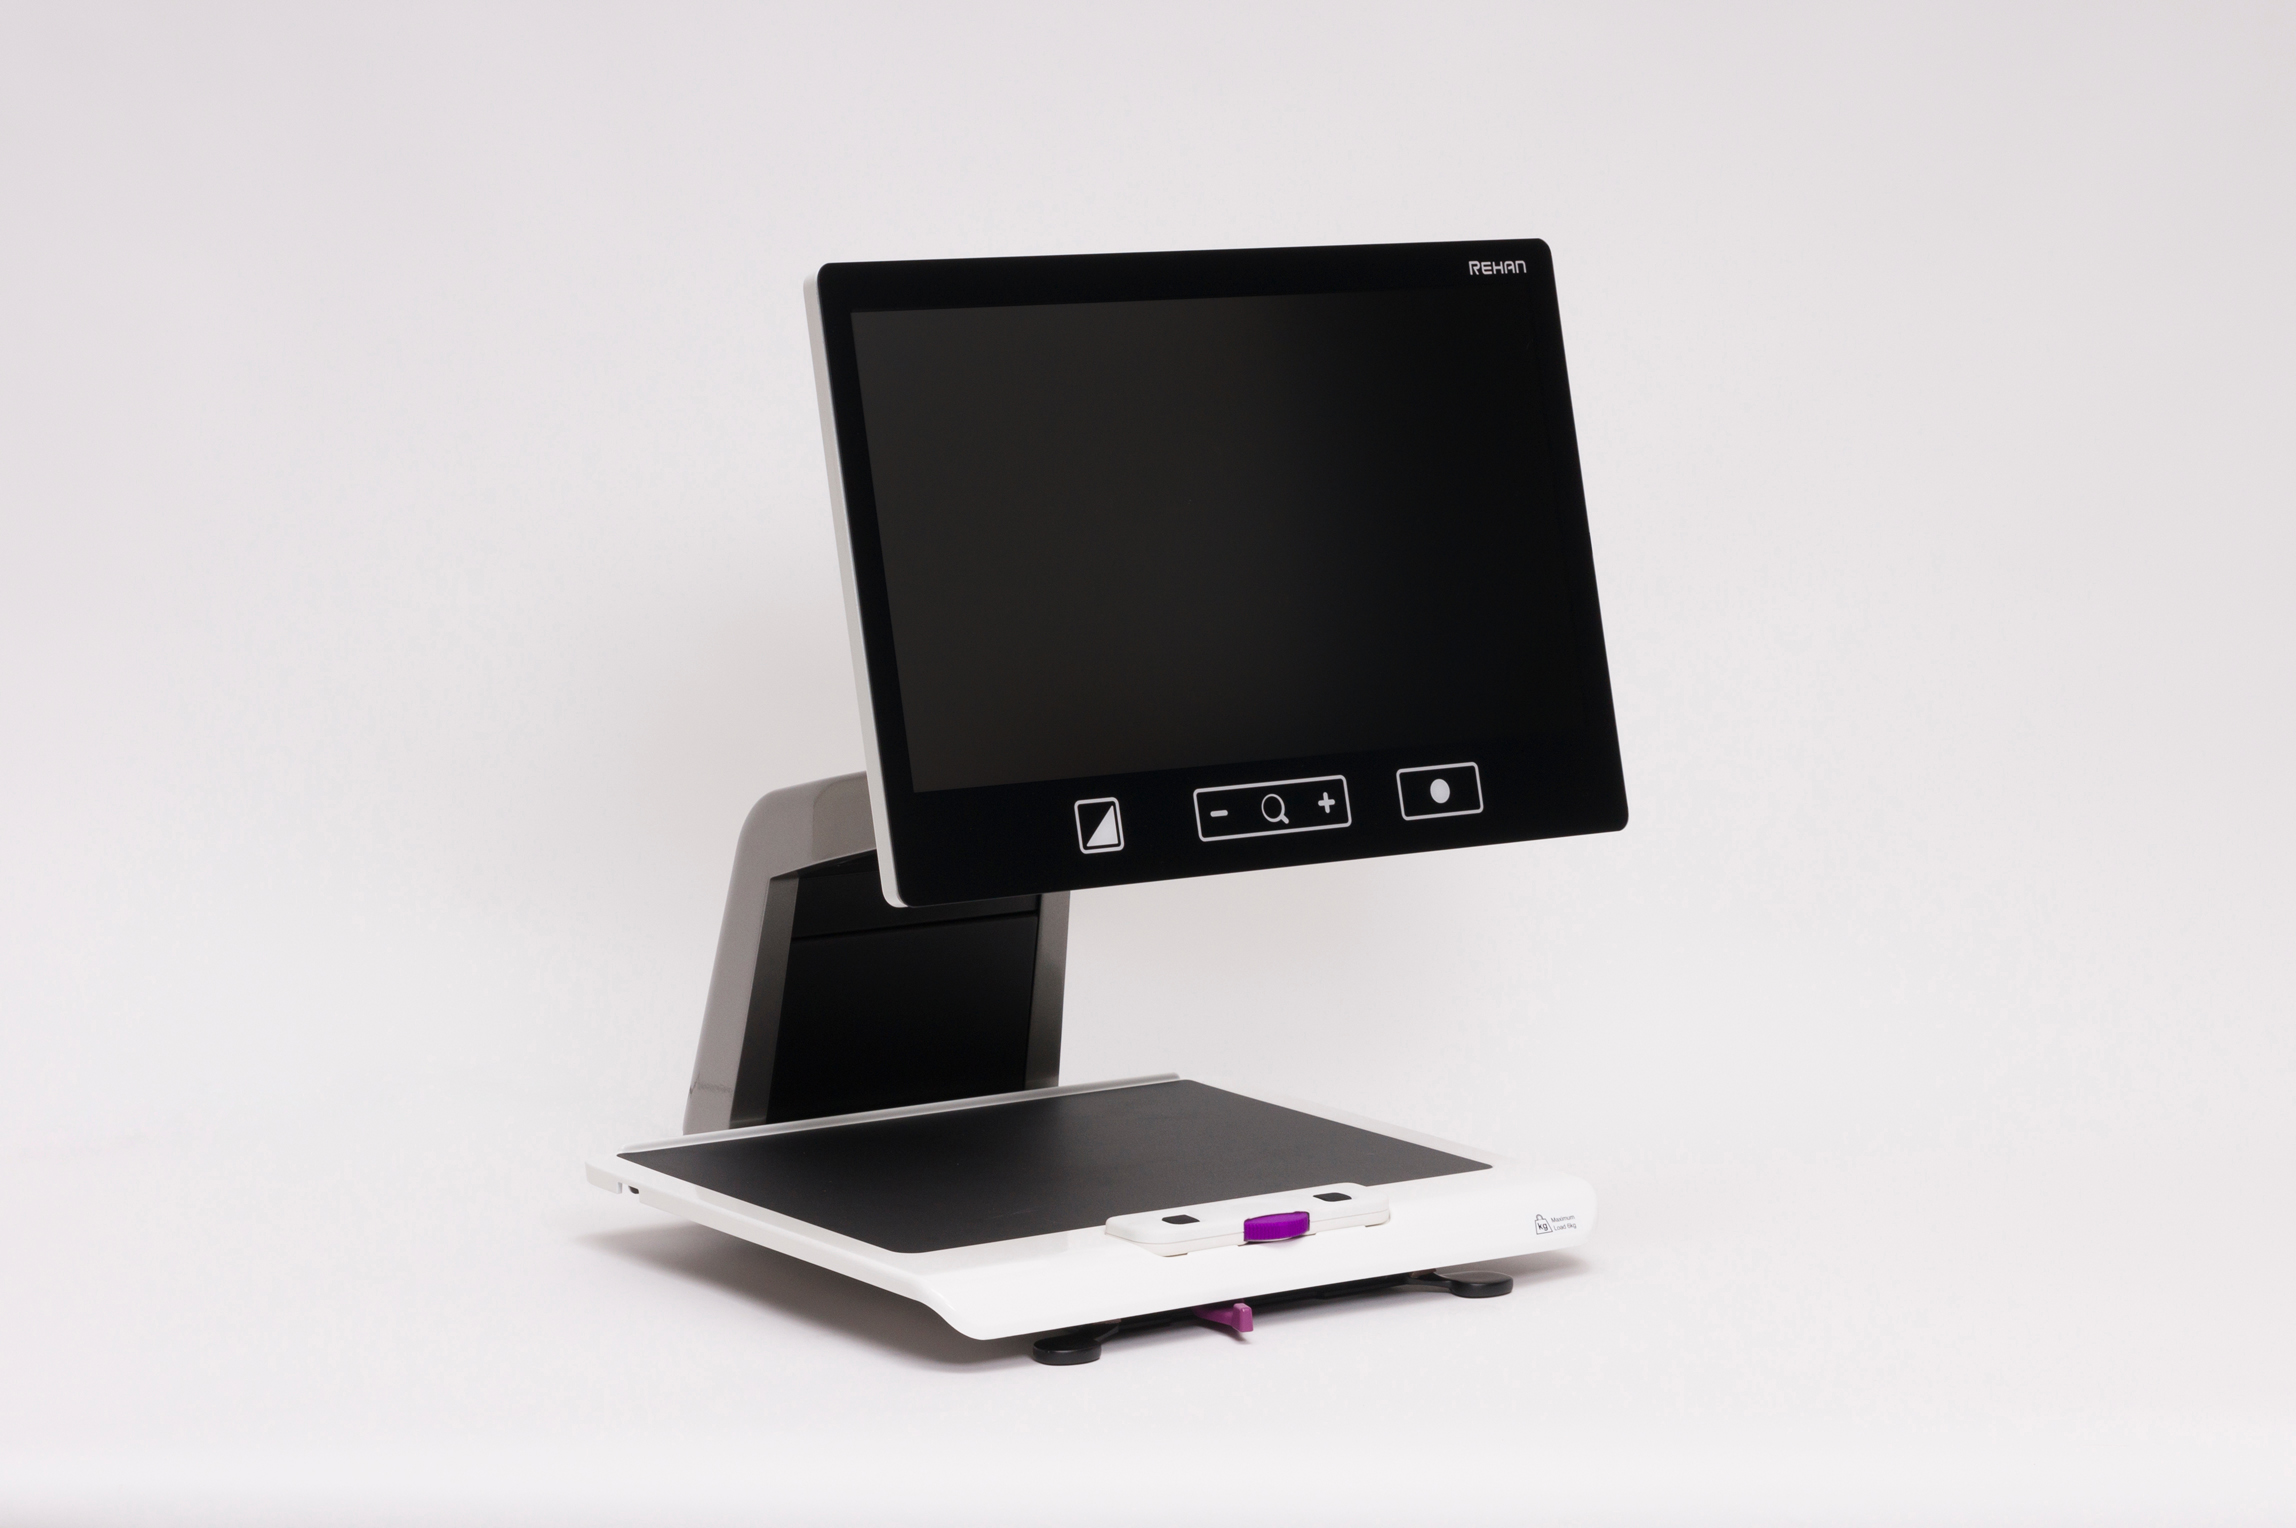 The Acuity Speech Desktop video magnifier. ETLB can provide training on this product.